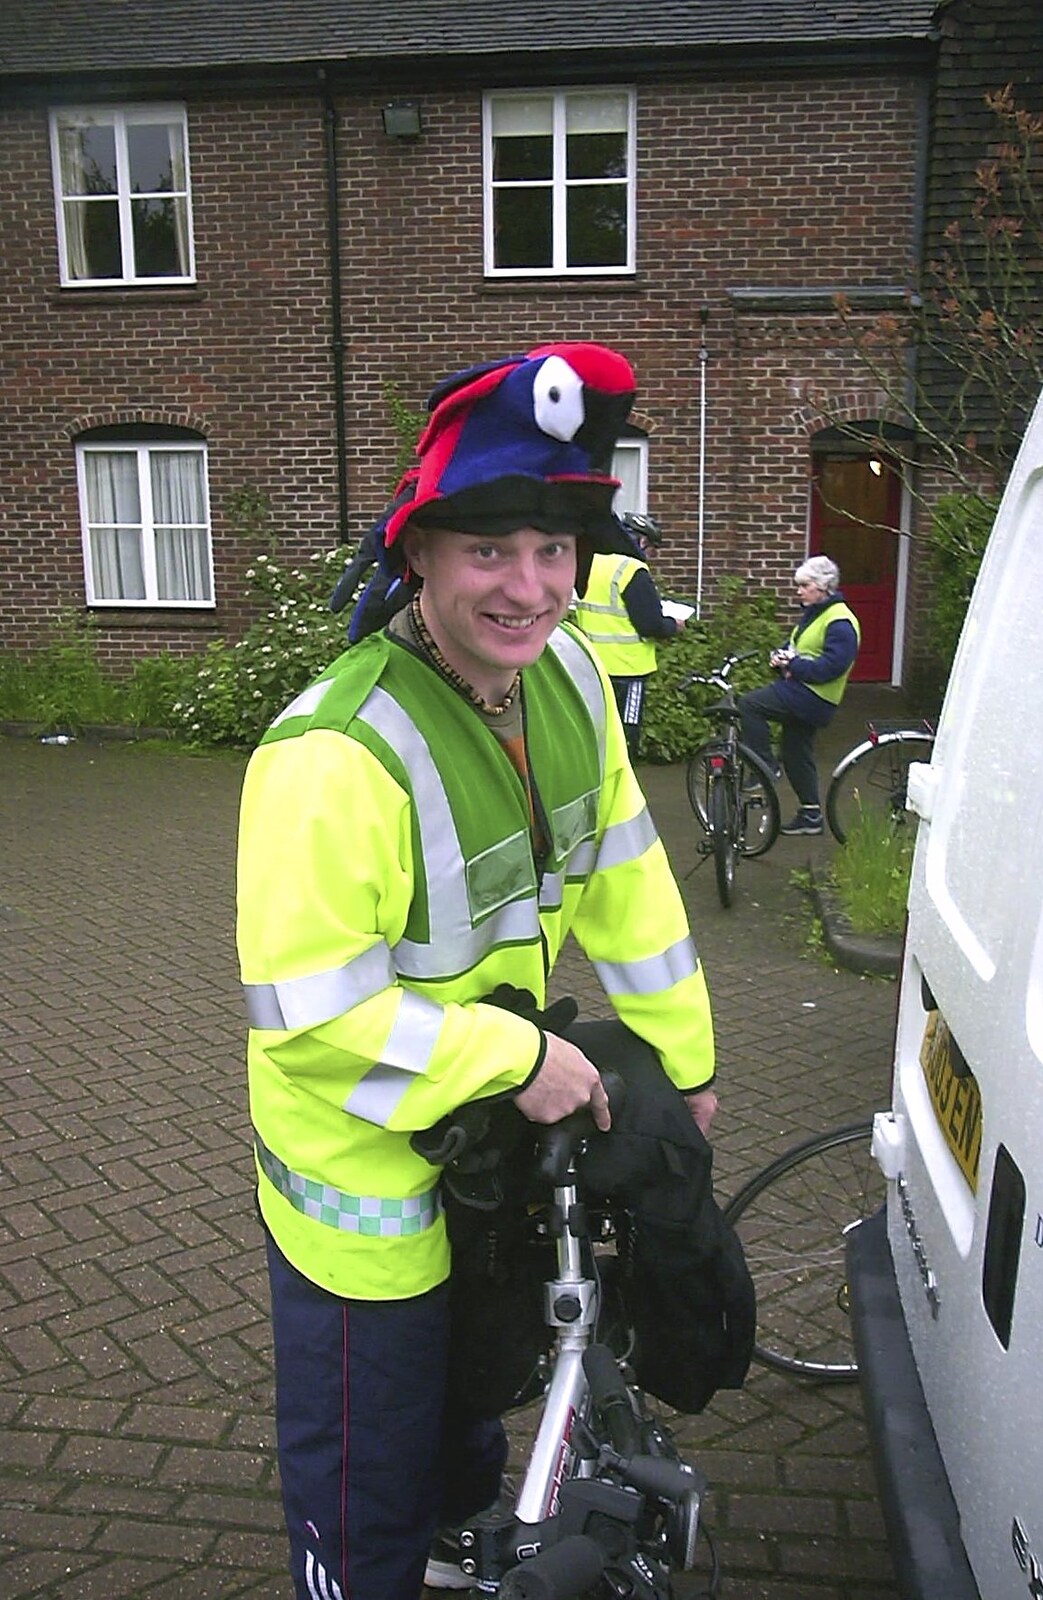 The BSCC Annual Bike Ride, Lenham, Kent - 8th May 2004: Gov's got a parrot hat on